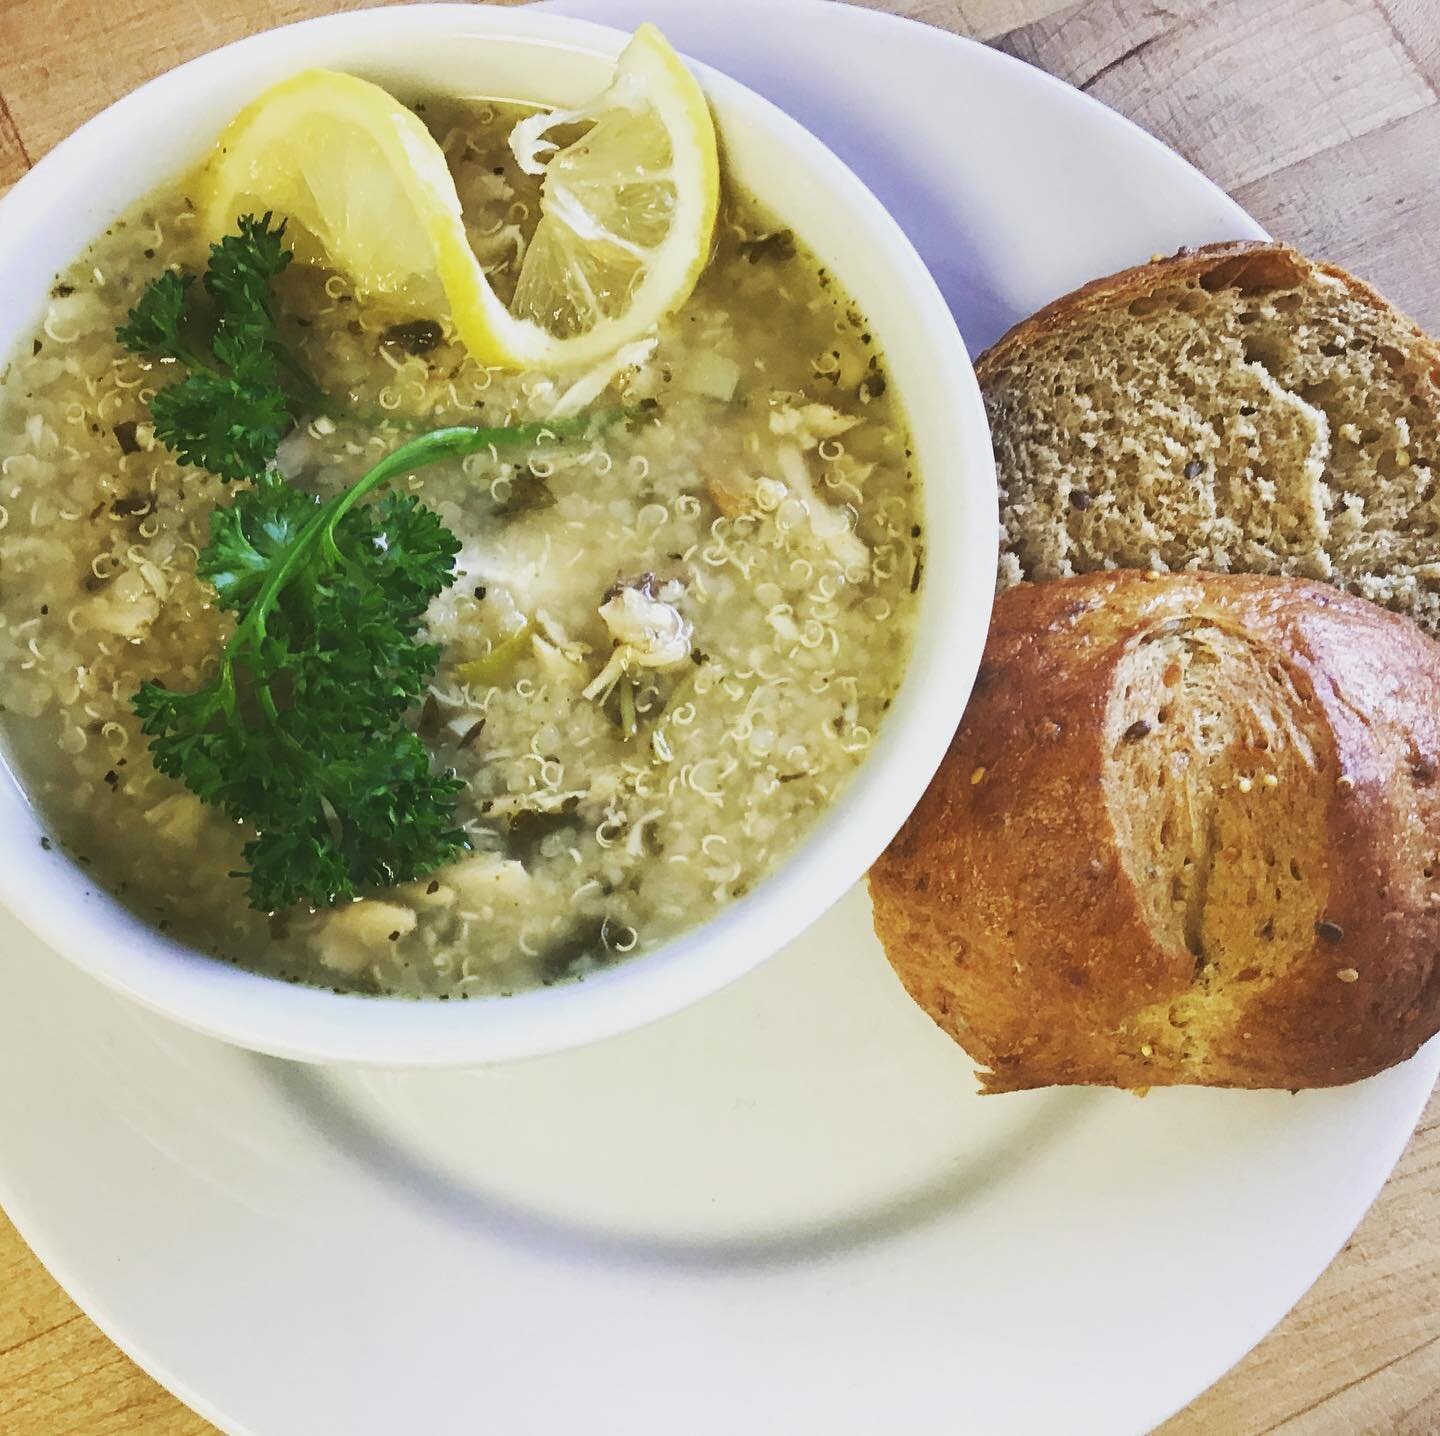 Good morning everyone!
We hope you all have had a great summer!
We have been away from social media for a while, but we are back! 
We are excited to announce we are be bringing back our soups as of today!
We have our Lemon Chicken Quinoa soup and our